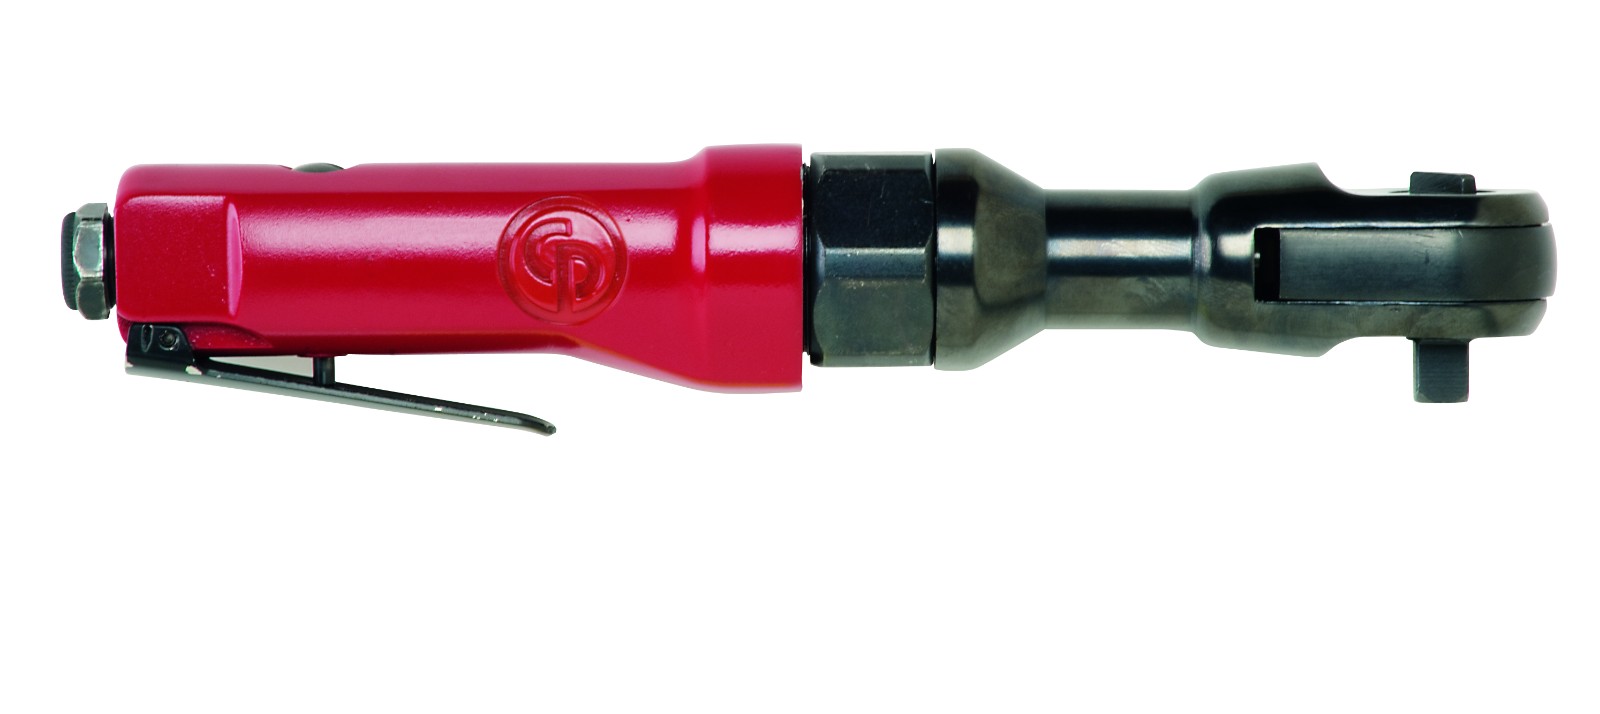 Chicago Pneumatic 3/8" drive General Duty Air Ratchet 50 ft. lbs. Max. Torque